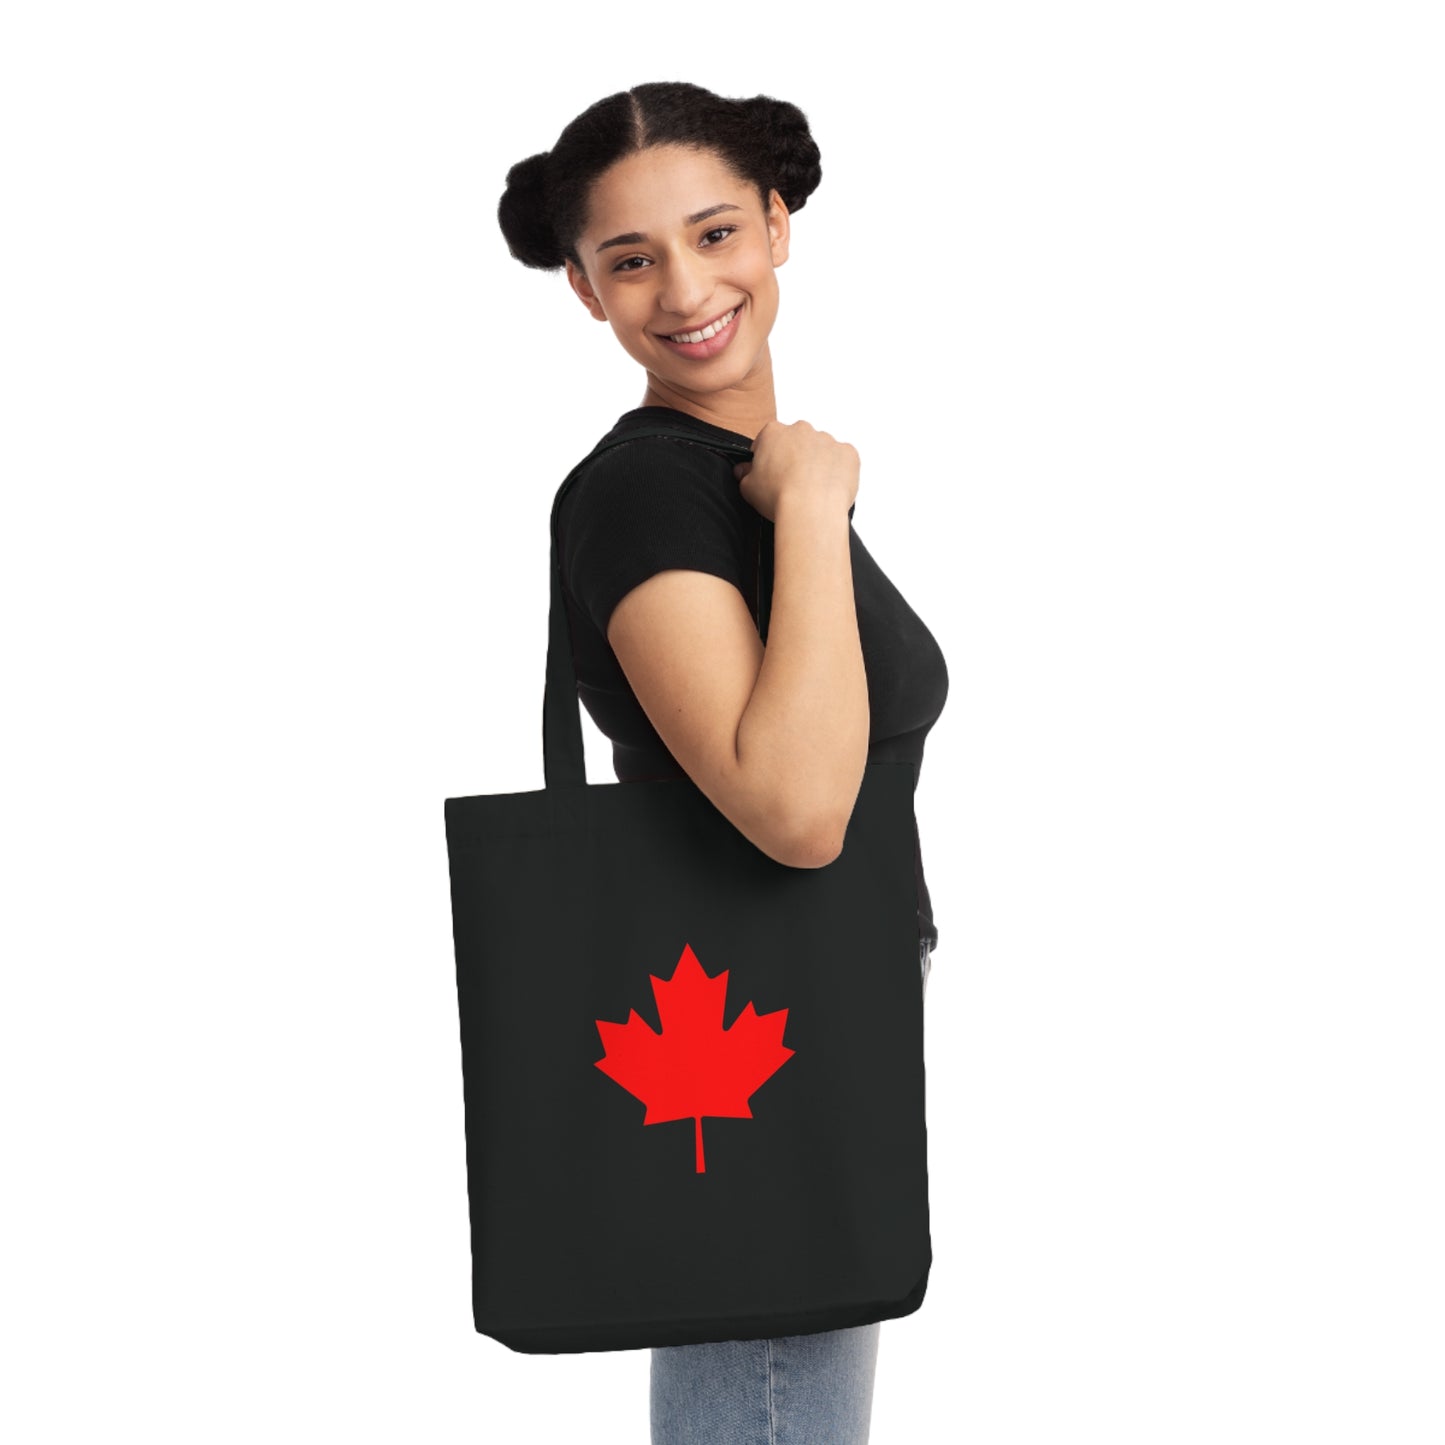 Canadian Maple Leaf, Woven Tote Bag